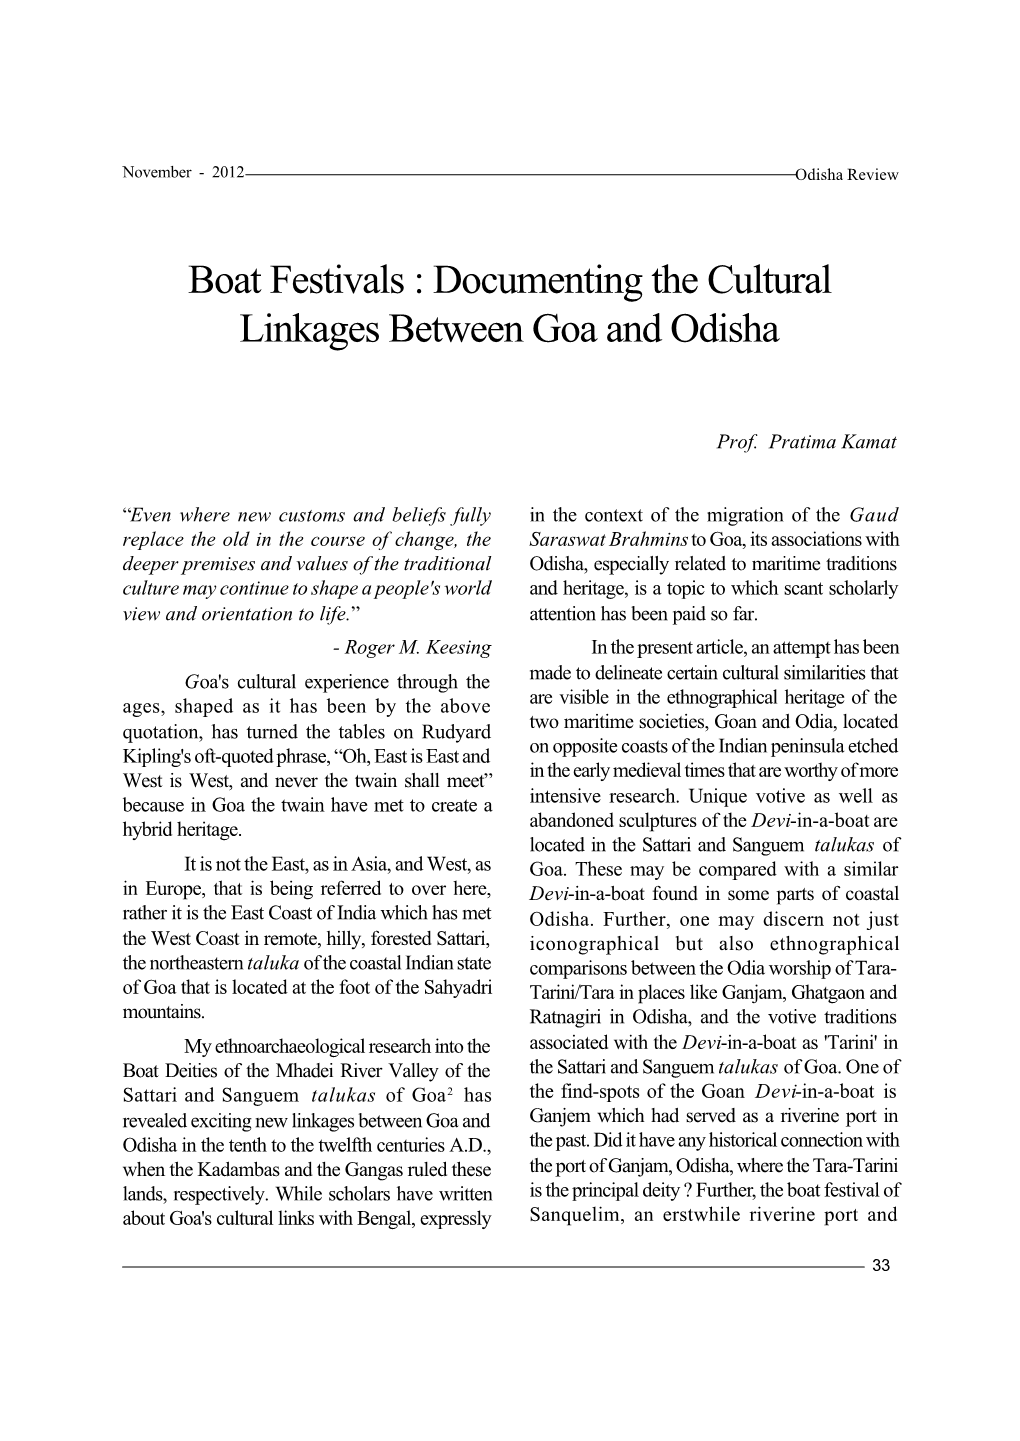 Boat Festivals : Documenting the Cultural Linkages Between Goa and Odisha